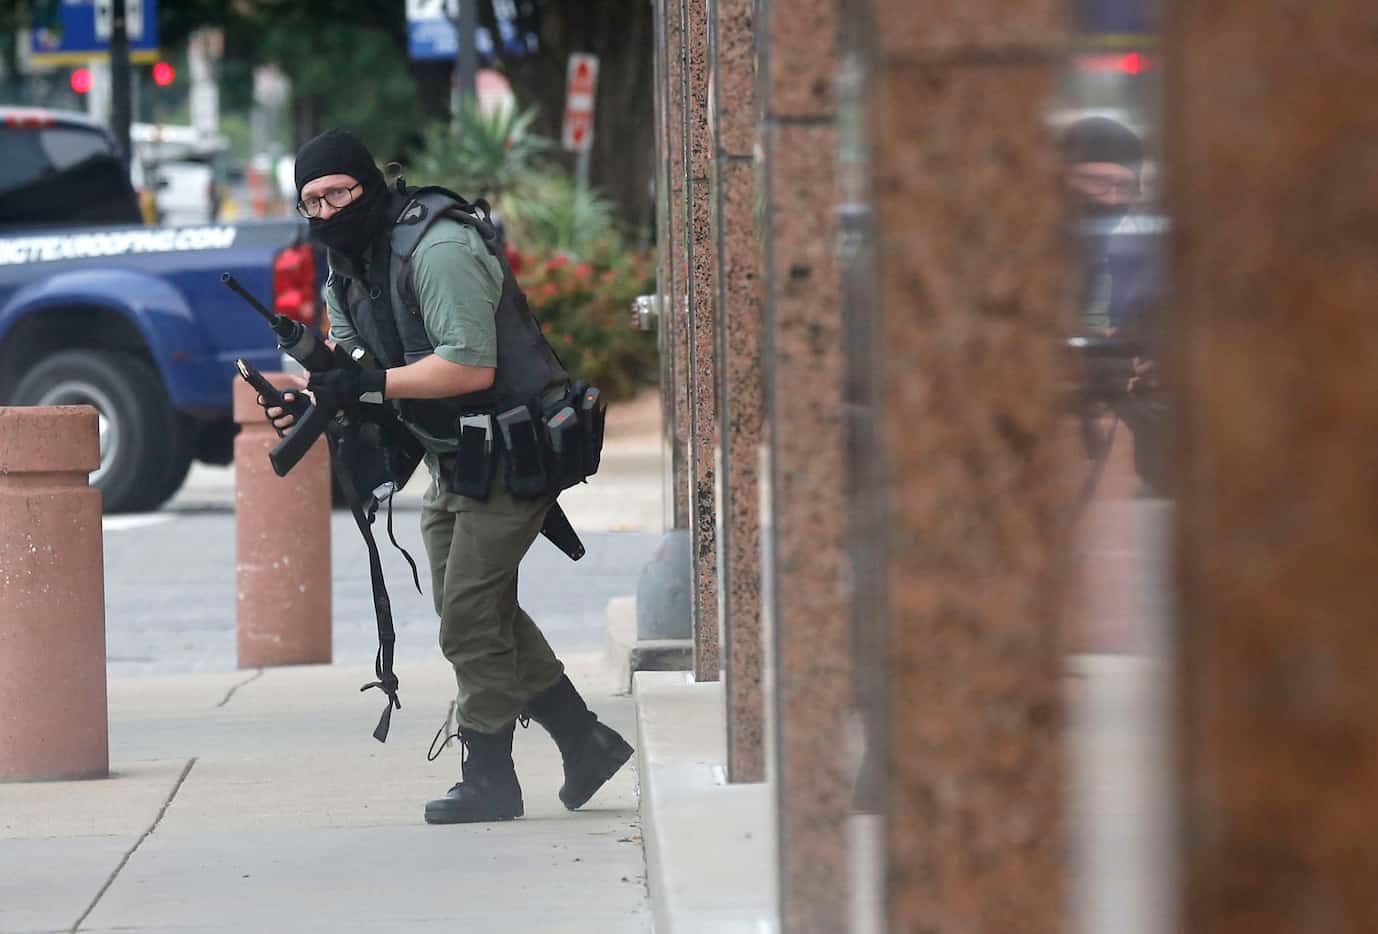 Armed with an AR-15 style rife, Brian Isaack Clyde attacks the Earle Cabell Federal Building...